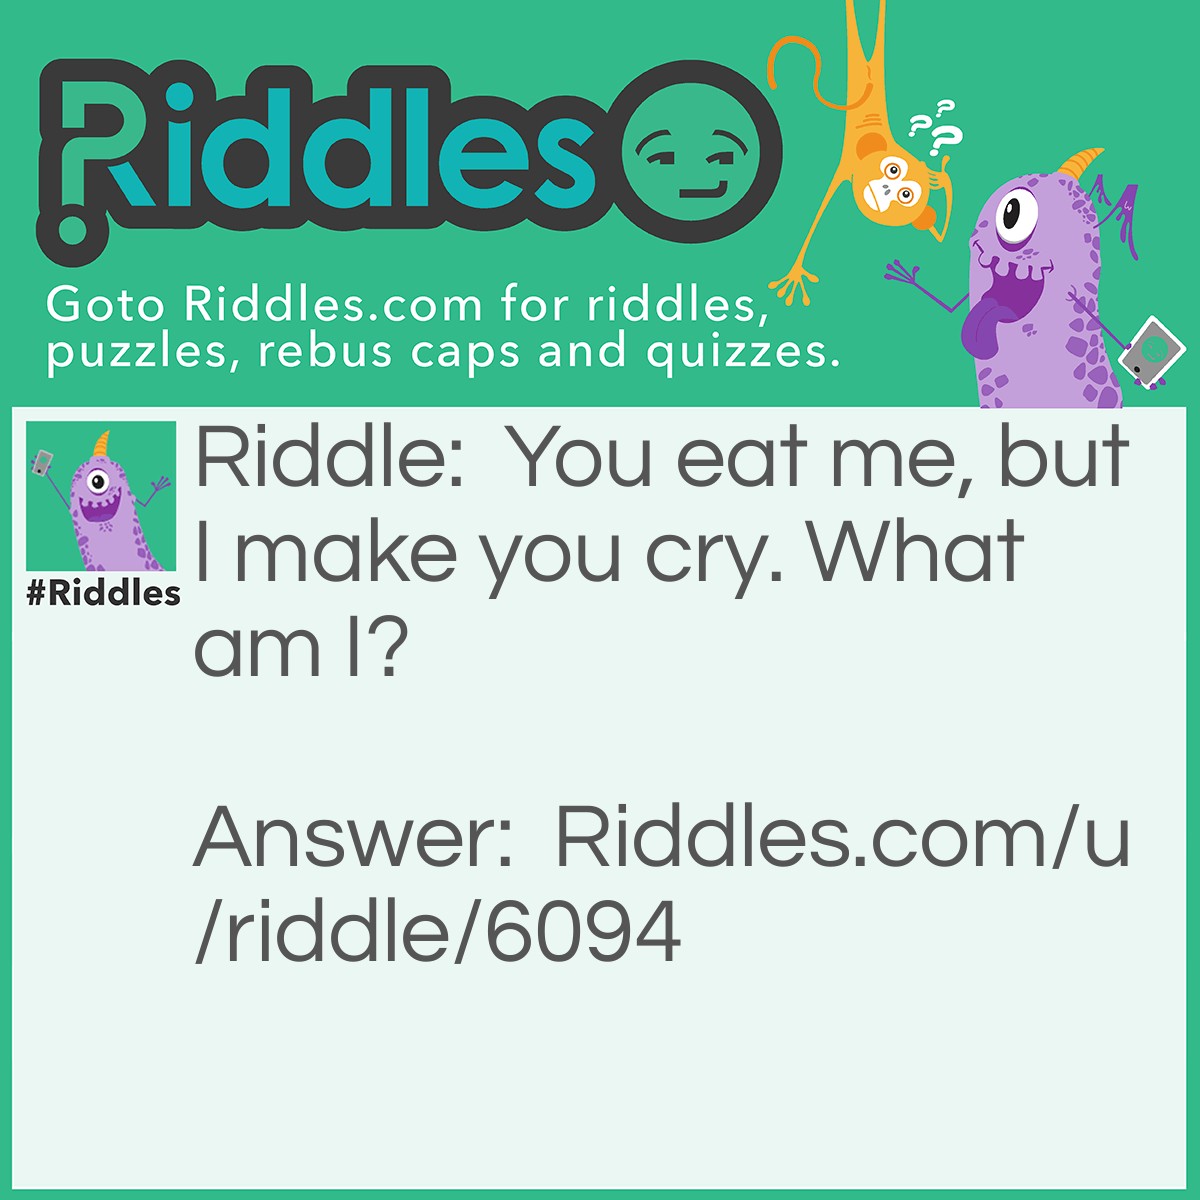 Riddle: You eat me, but I make you cry. What am I? Answer: An onion.